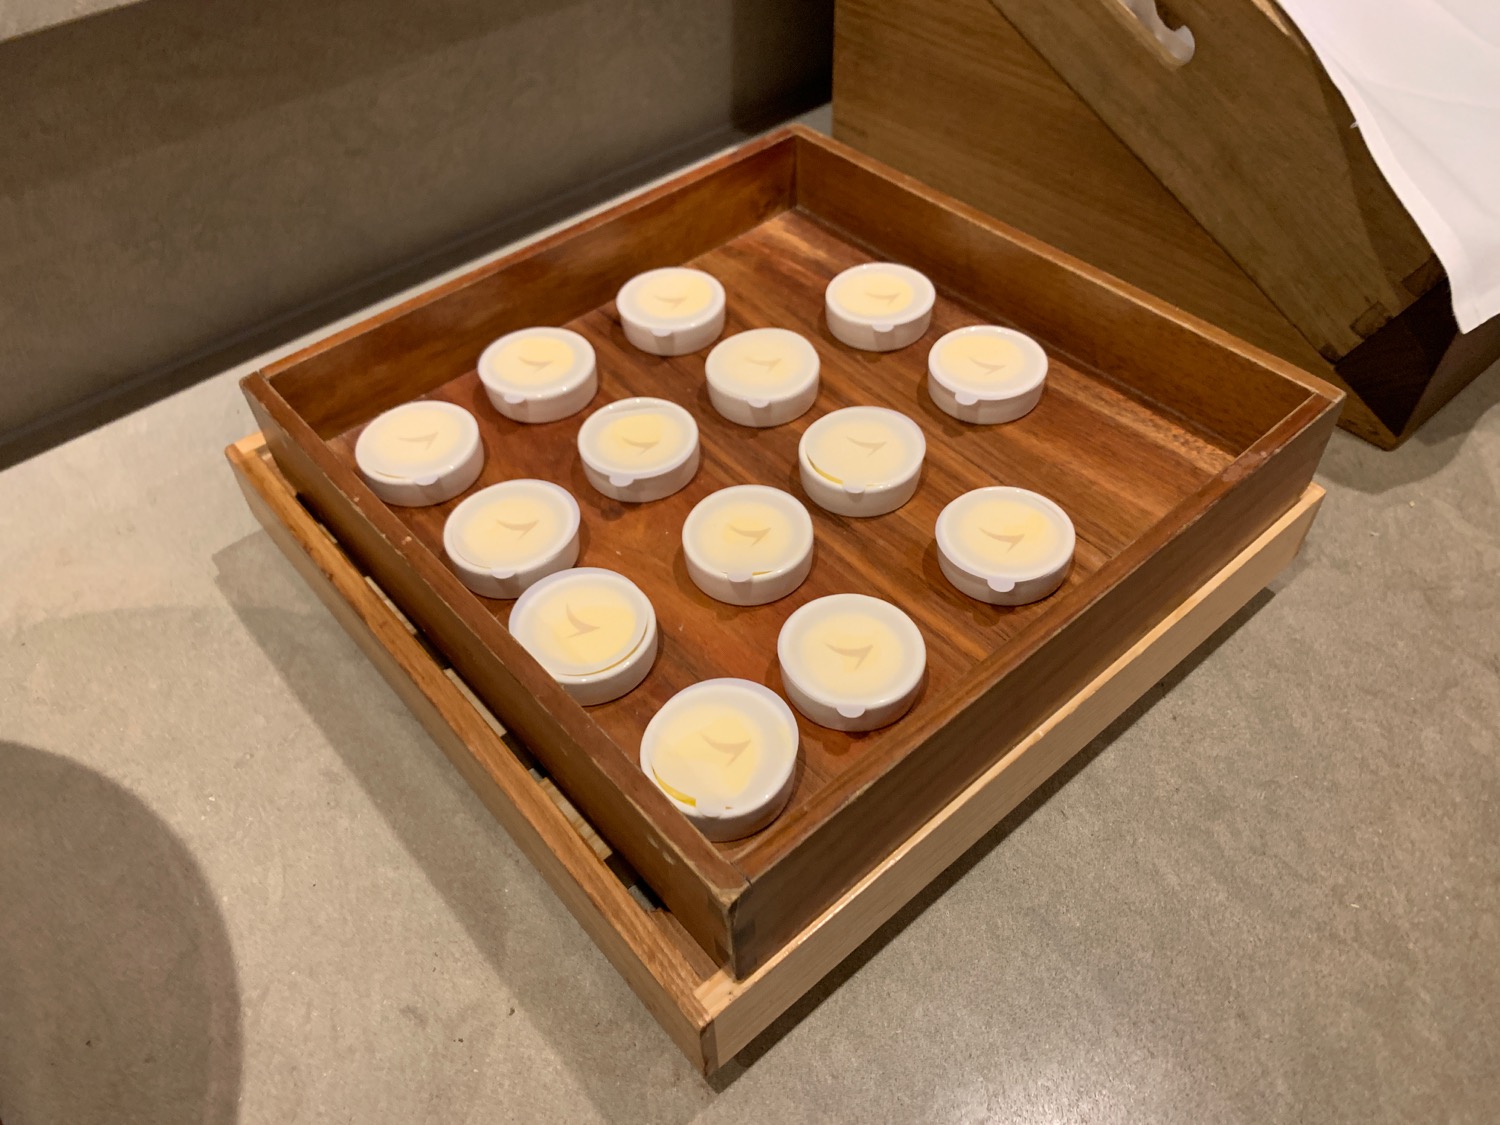 a wooden box with white circles on it